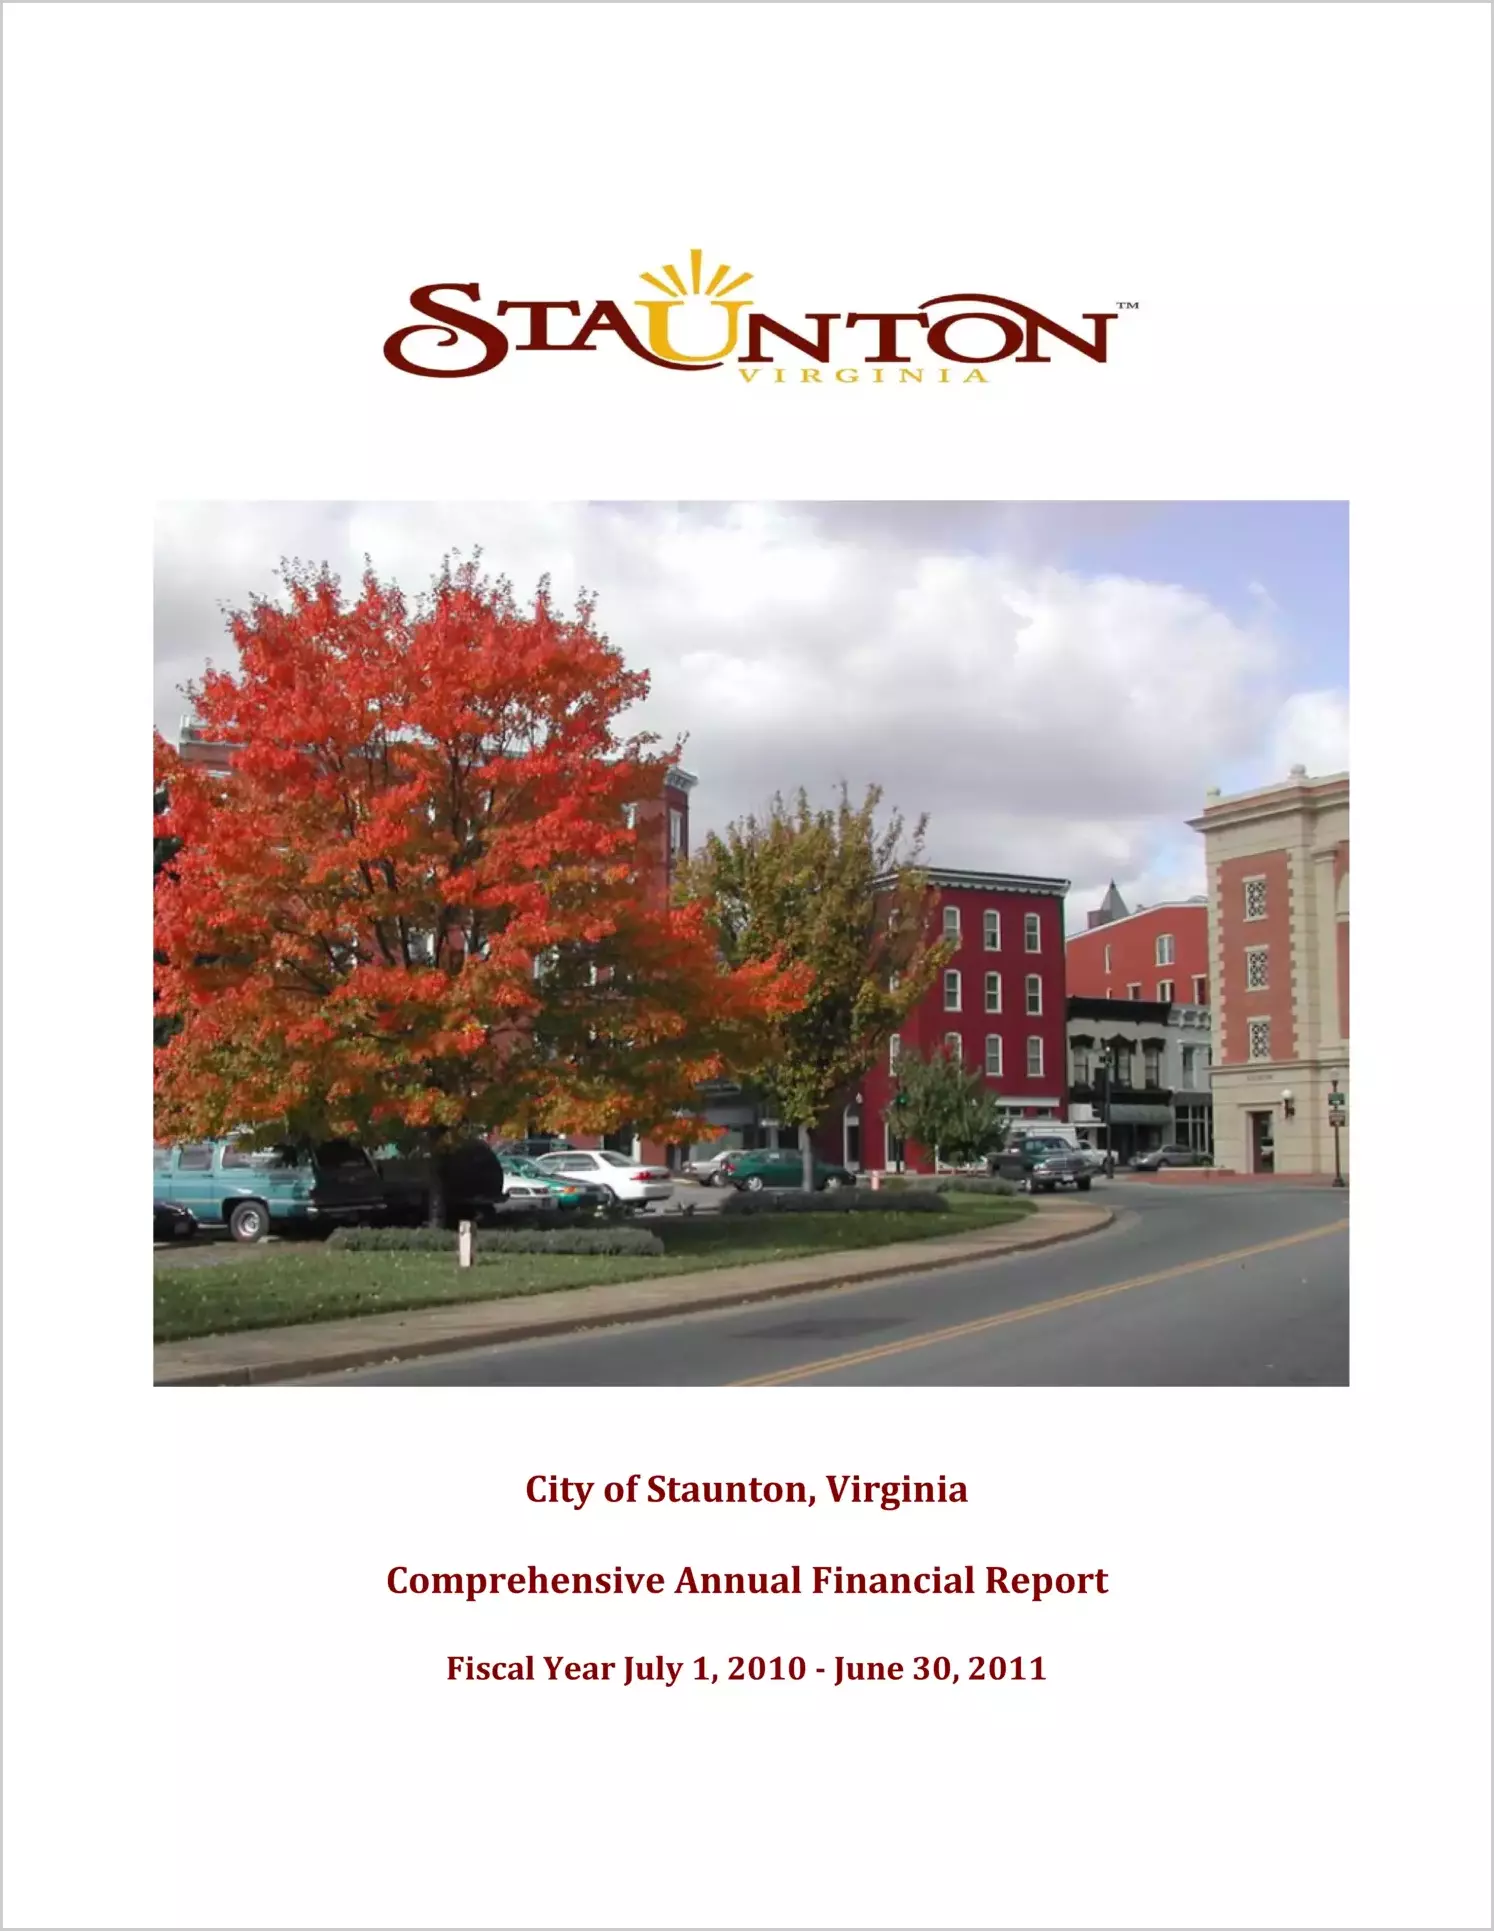 2011 Annual Financial Report for City of Staunton